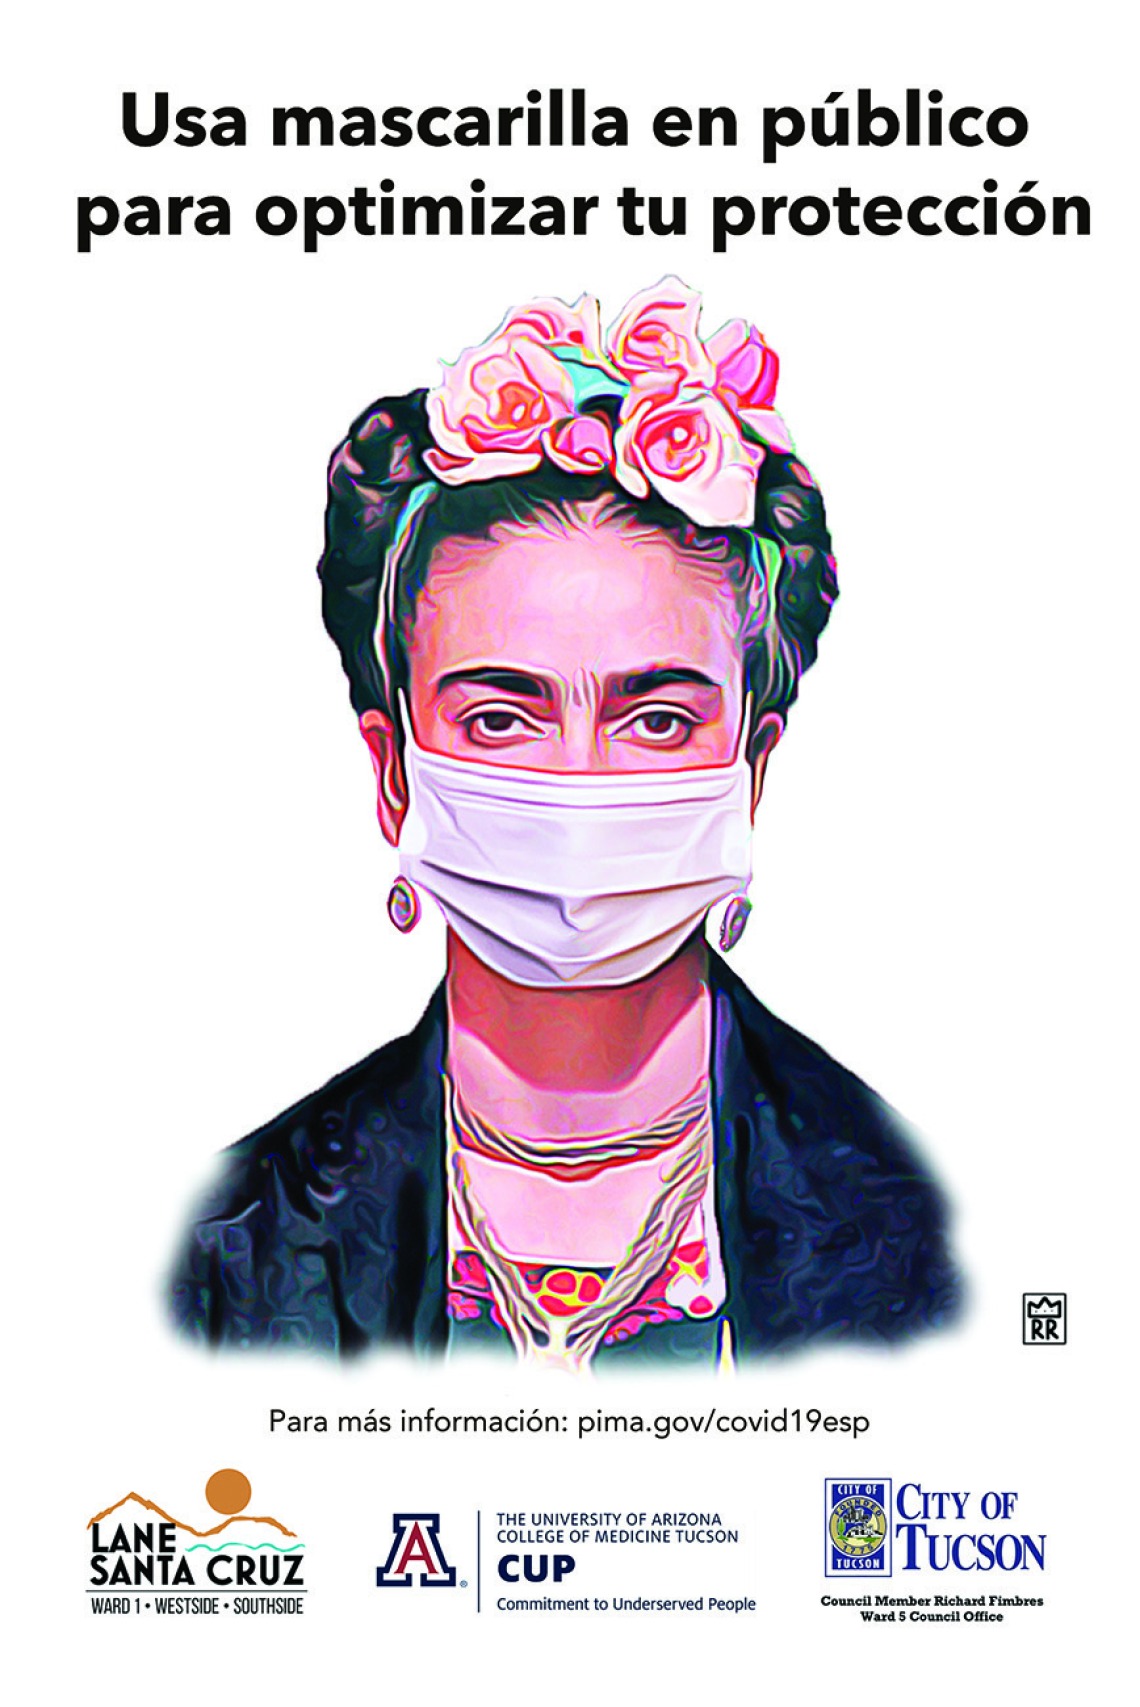 This poster plays on the art and persona of Frida Kahlo in urging people to wear masks on their faces. “I was talking with one of my classmates about still seeing a lot of non-compliant or no social distancing in grocery stores and Walmart's and things like that,” said Cazandra Zaragoza, MPH, a fourth-year medical student at the College of Medicine – Tucson, who helped make and distribute the posters in May, 2020.